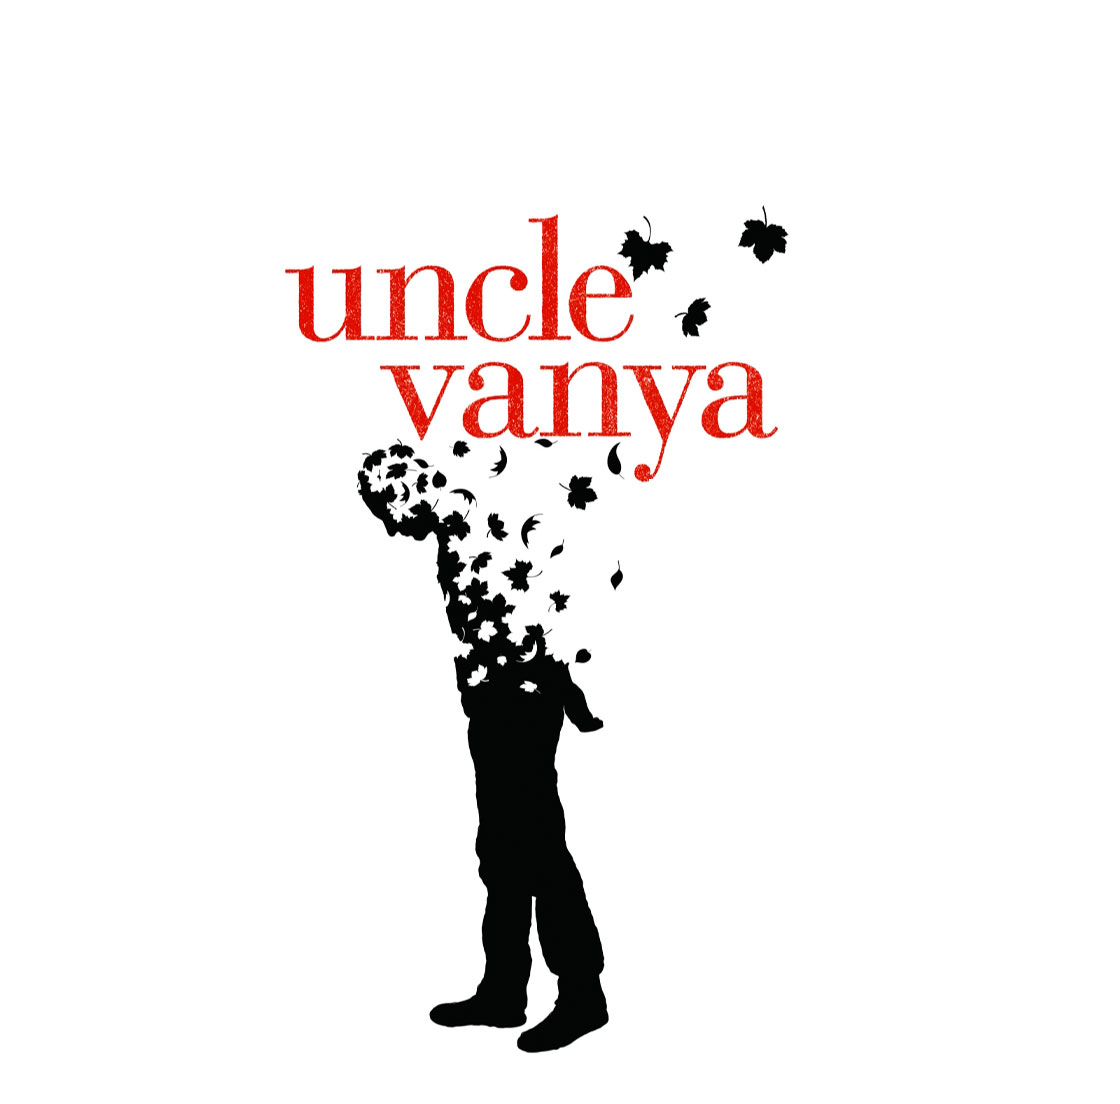 Uncle Vanya | by Anton Checkov | New Translation by Heidi Schreck | Directed by Lila Neugebauer